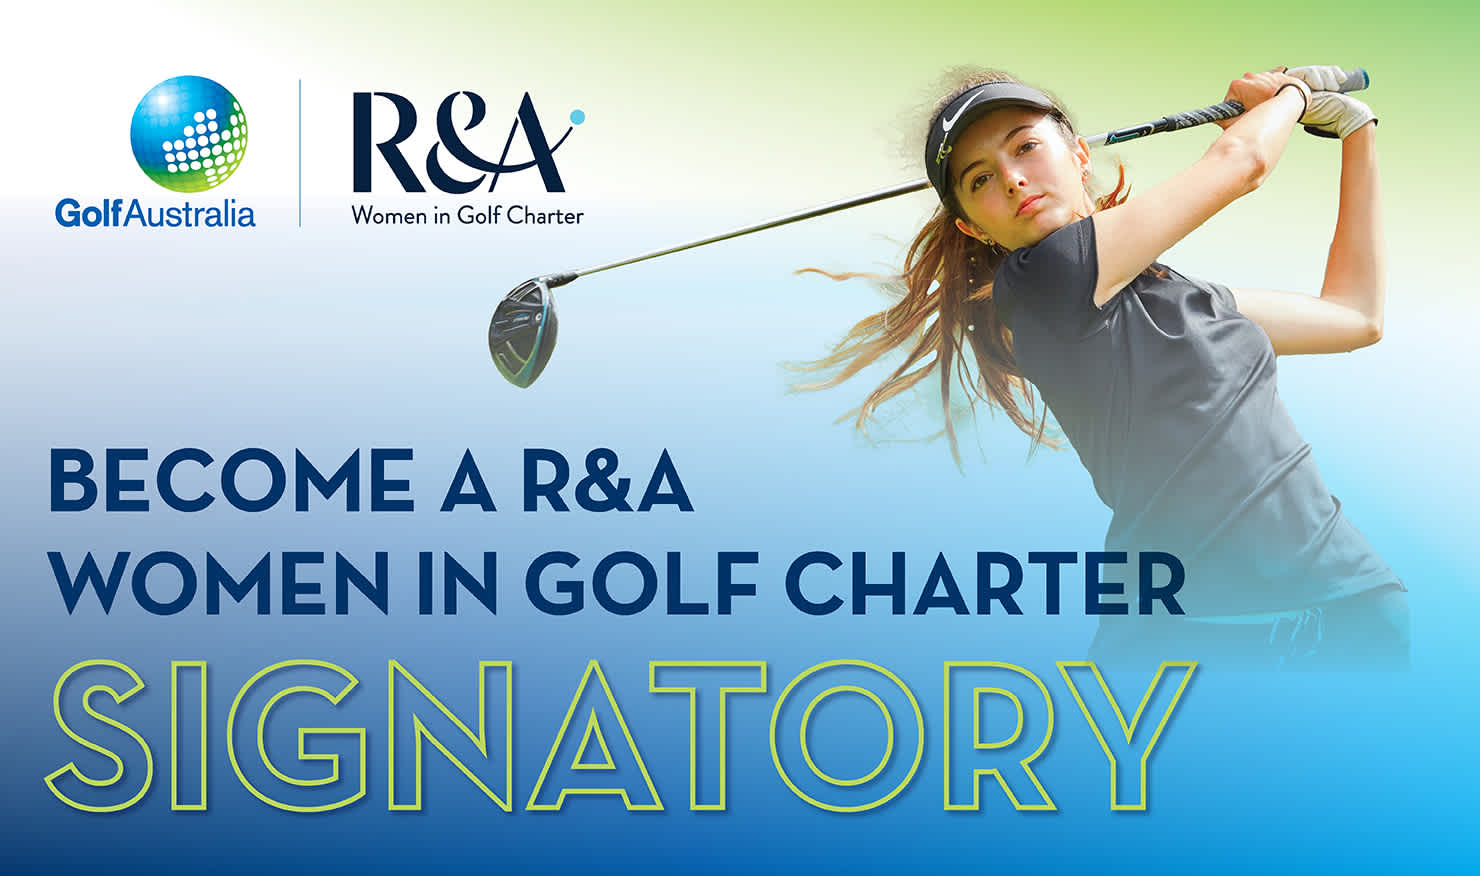 Women in Golf Charter become a signatory club